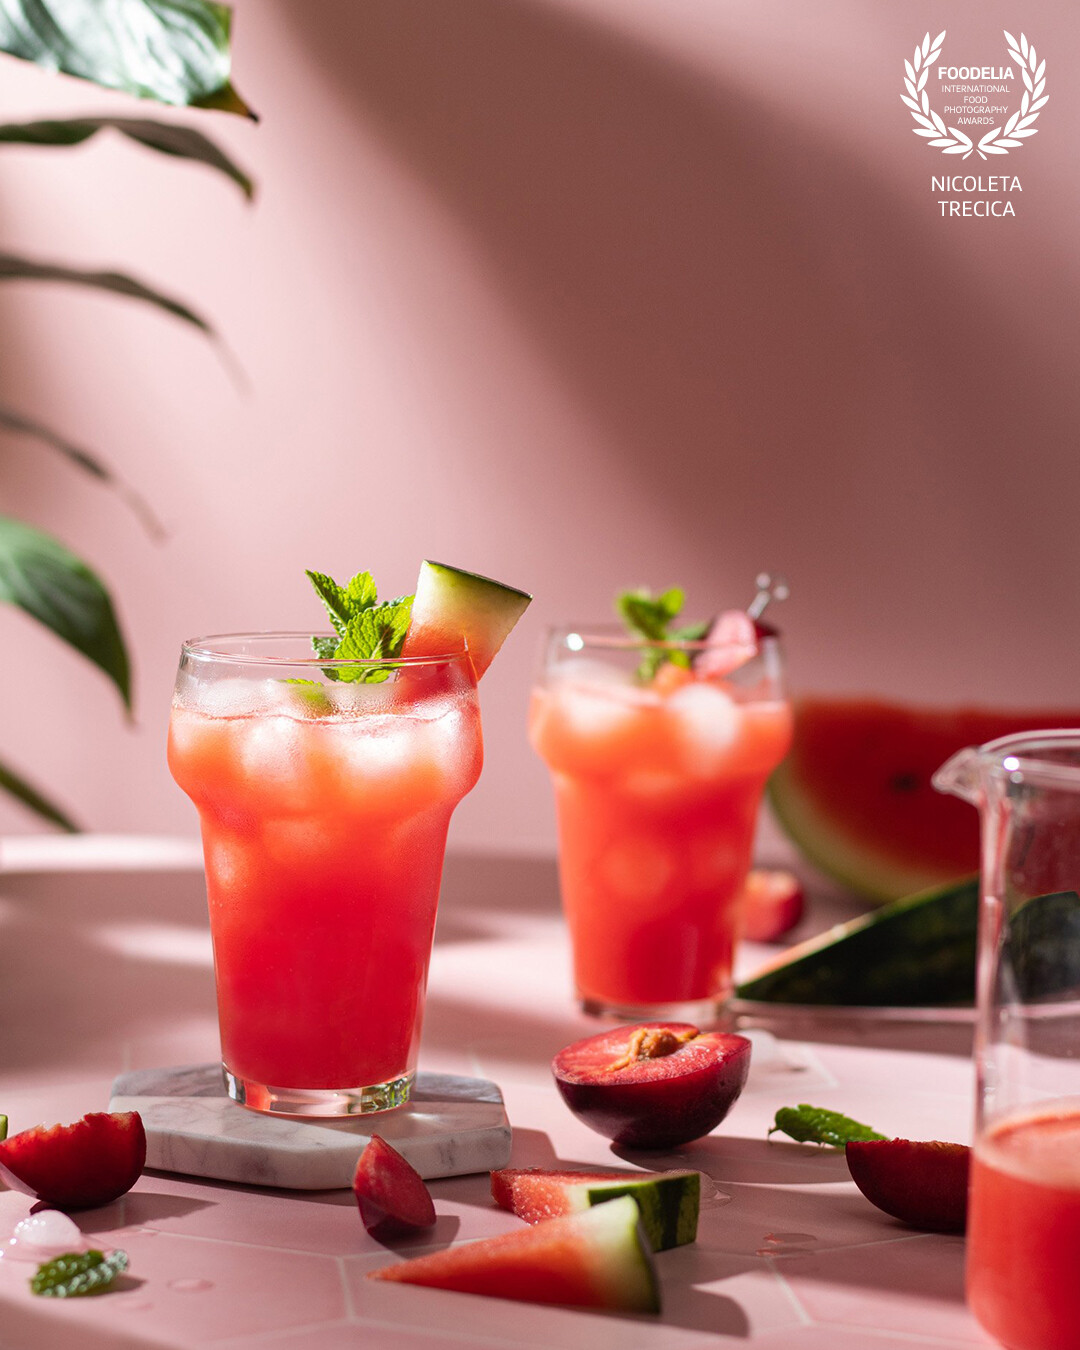 A refreshing watermelon drink that needed a perfect light and shades to make it appealing for the viewers eye.